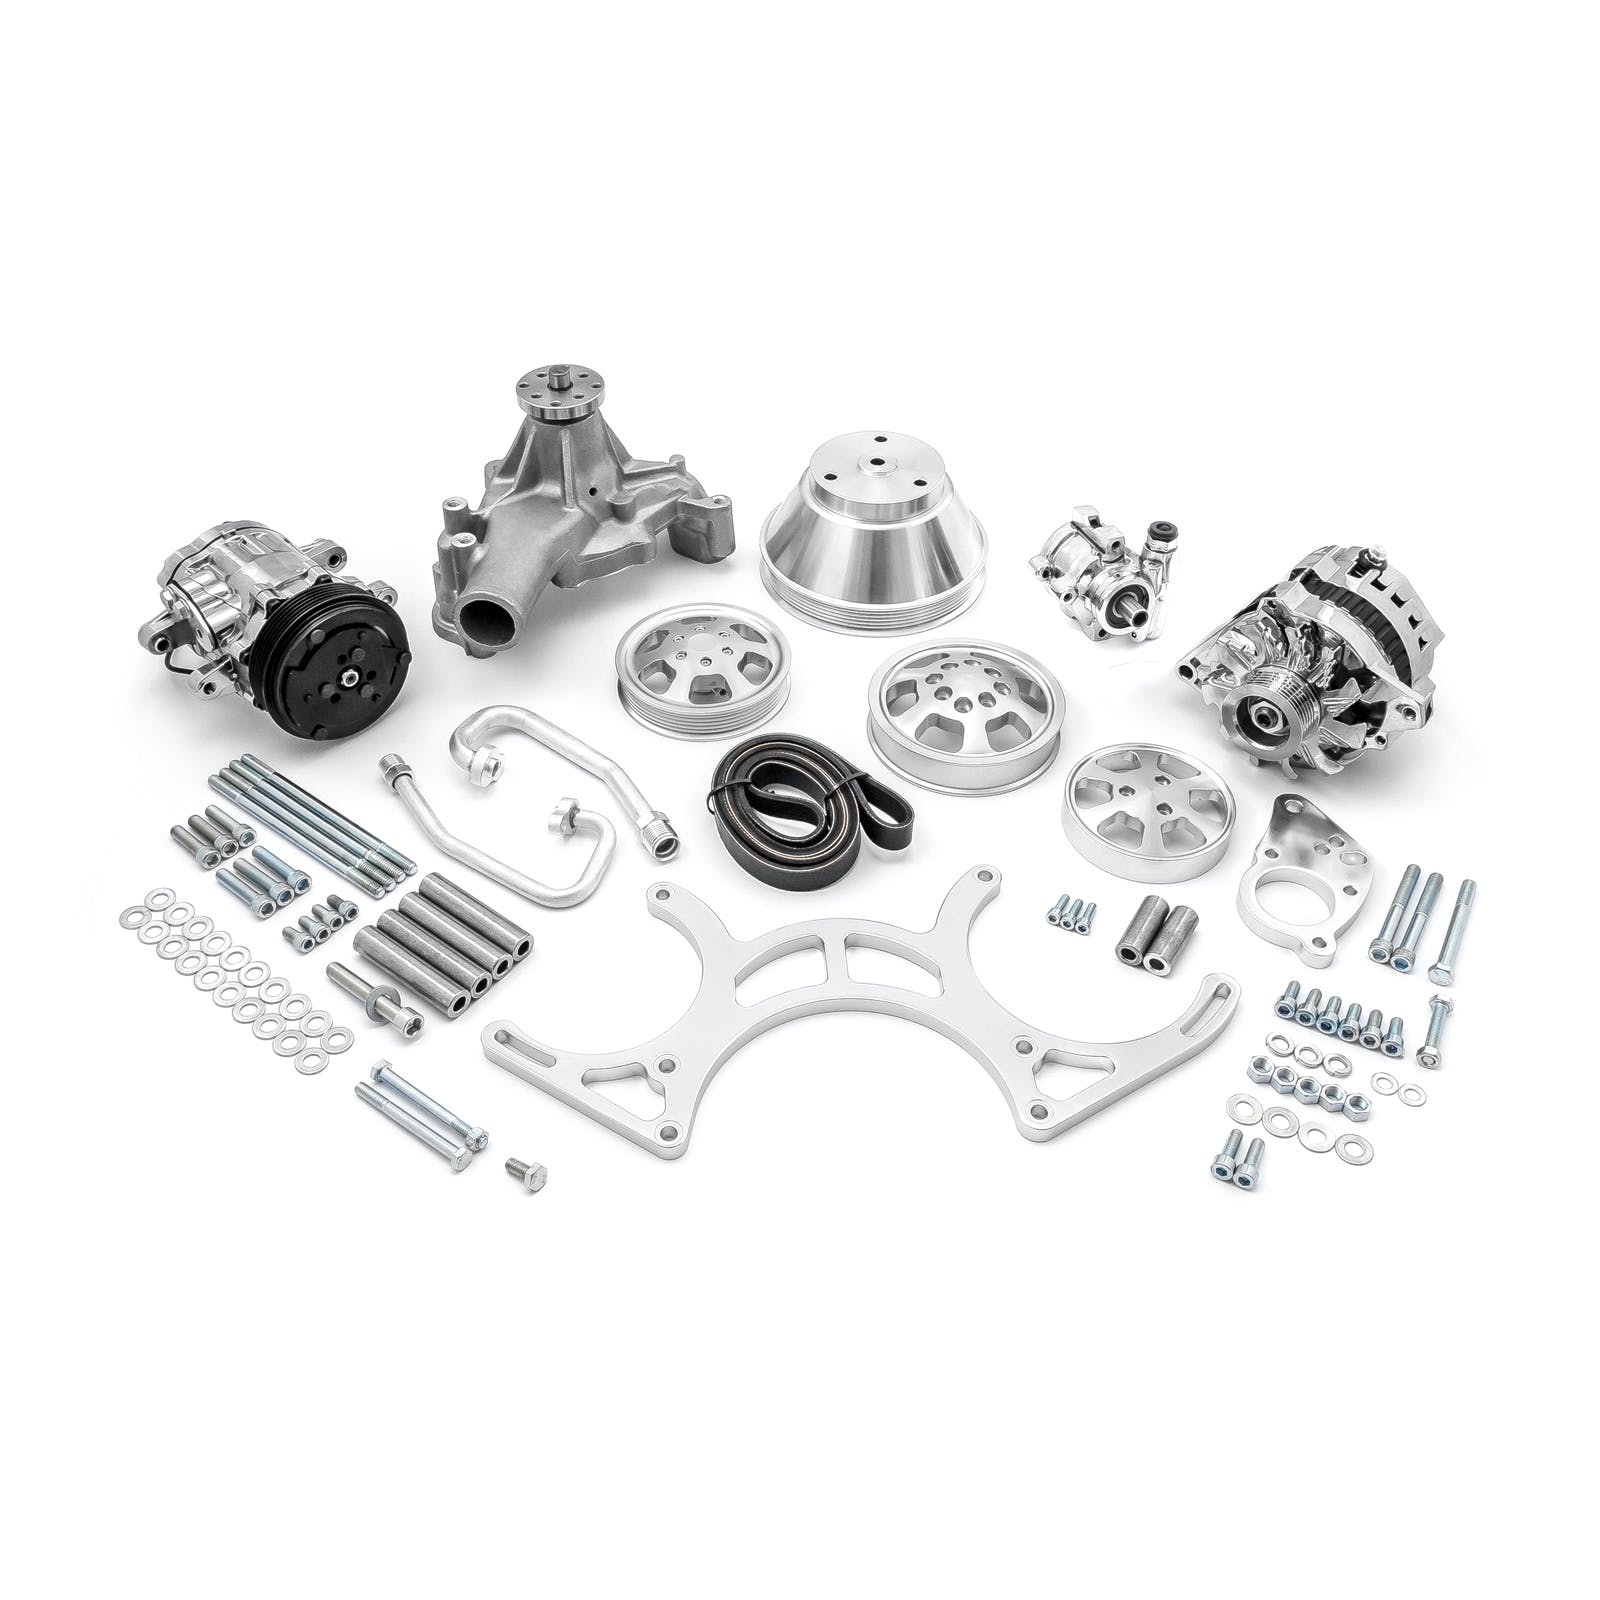 Speedmaster PCE415.1028 Aluminum Serpentine Complete Engine Pulley and Components Kit